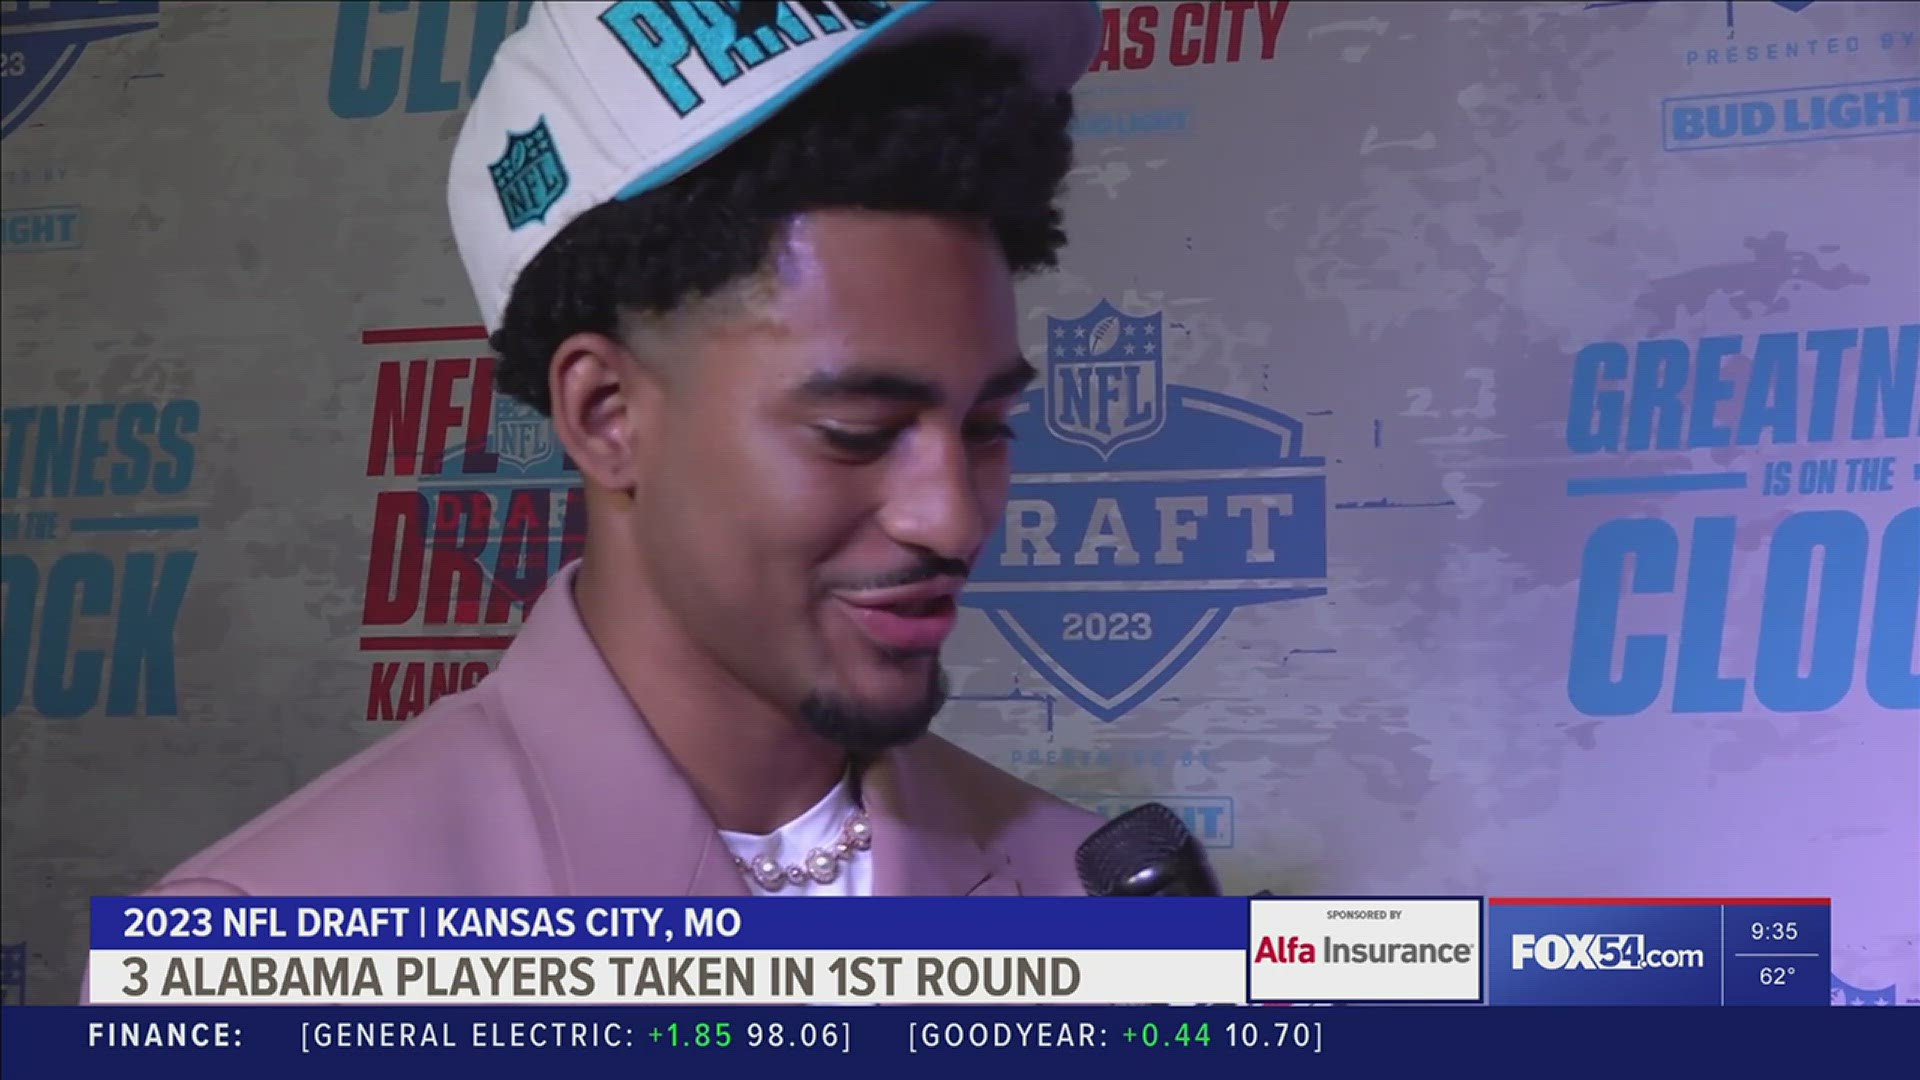 Sean Higgins from sister station WFMY in Kansas City speaks with Bryce Young, first pick (Carolina) in the NFL Draft.